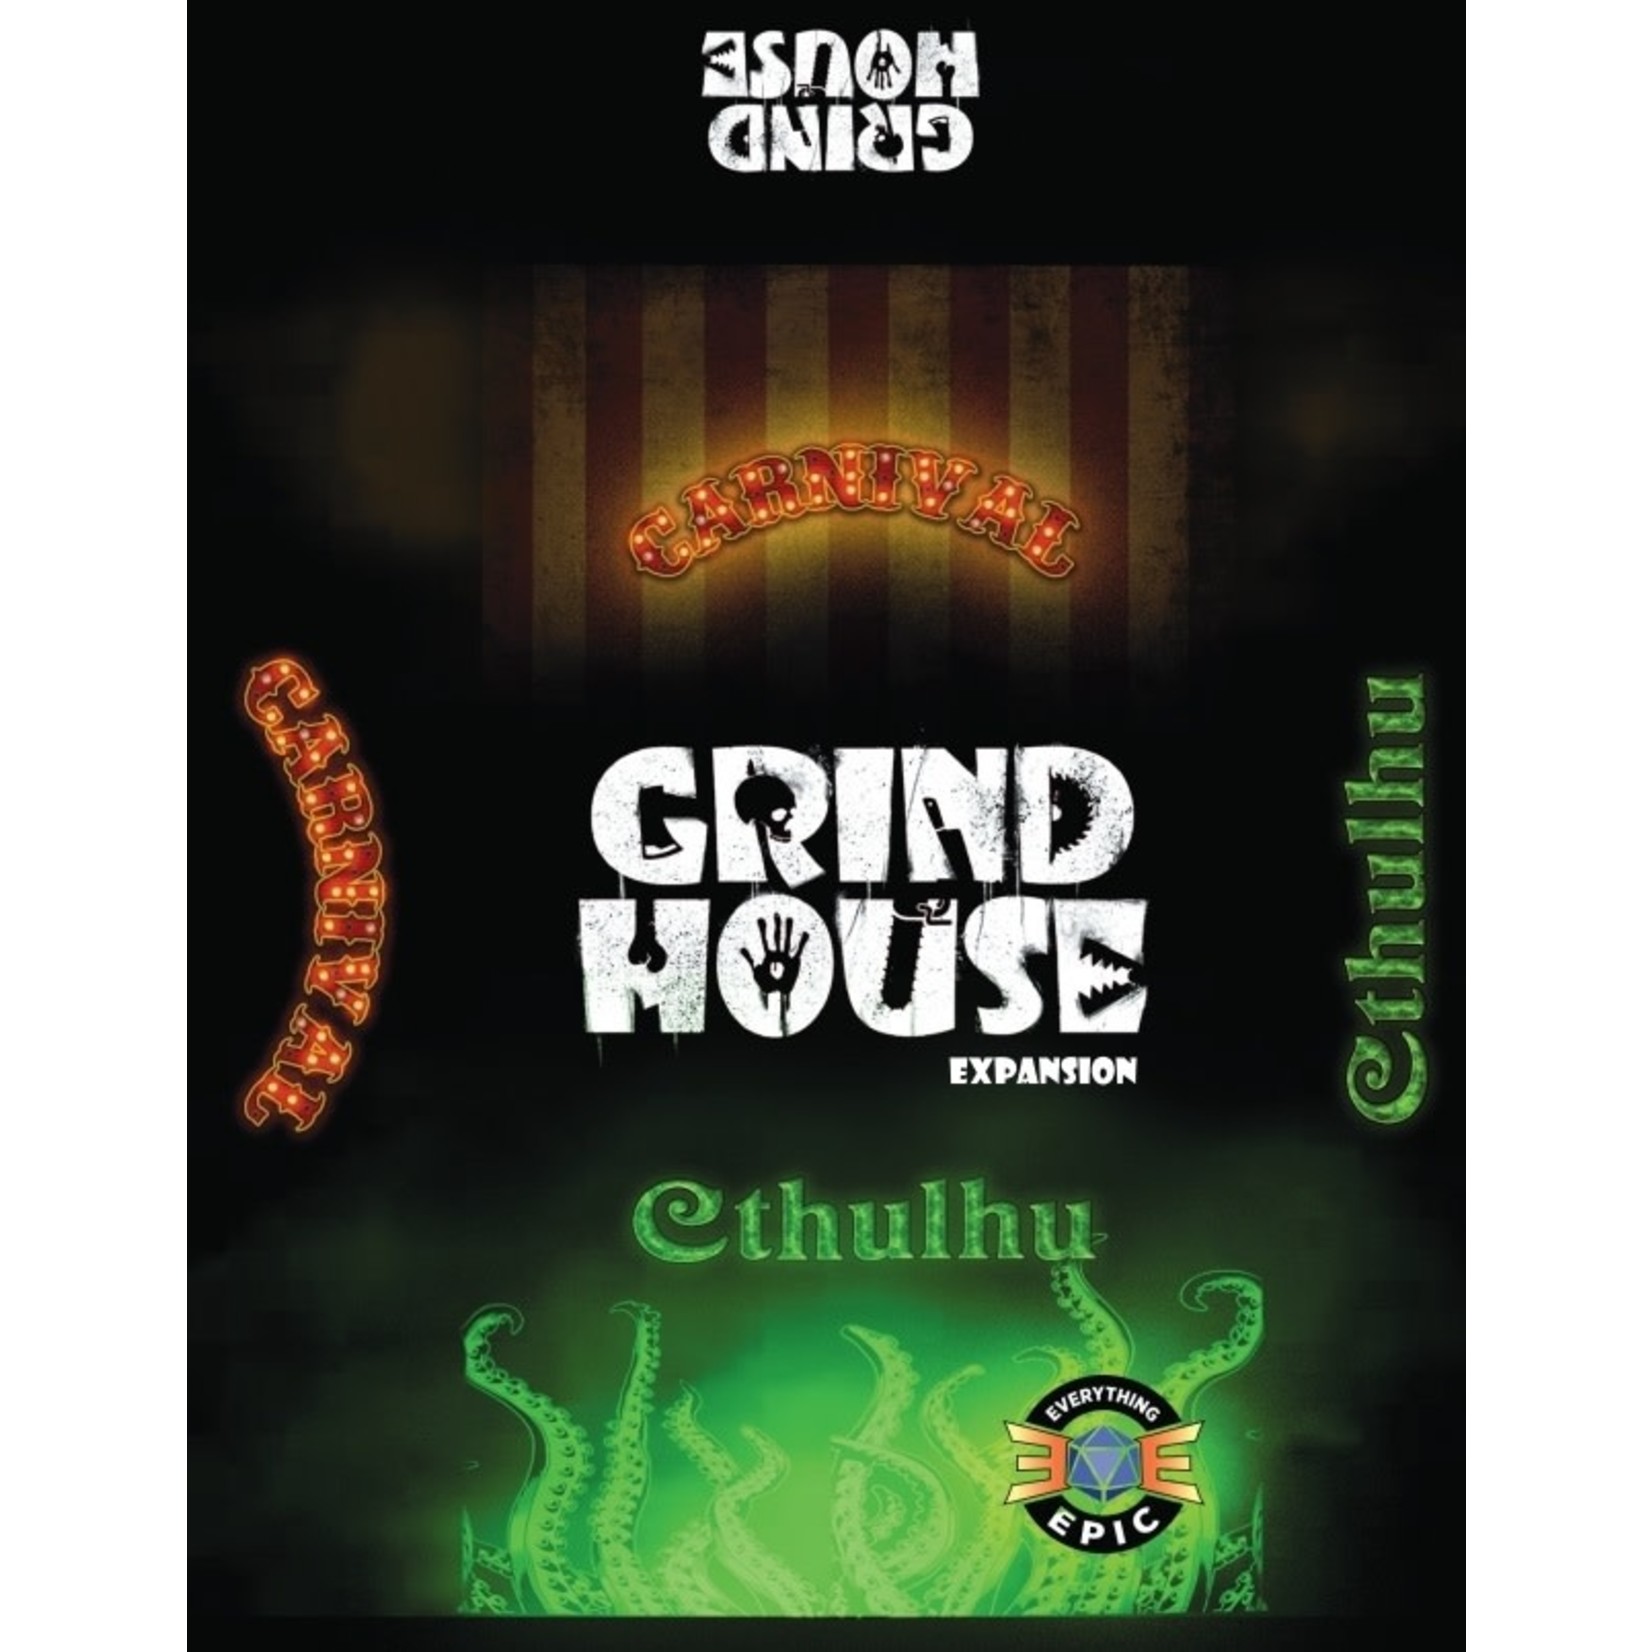 Everything EPIC Grind House Carnival and Cthulhu Expasion